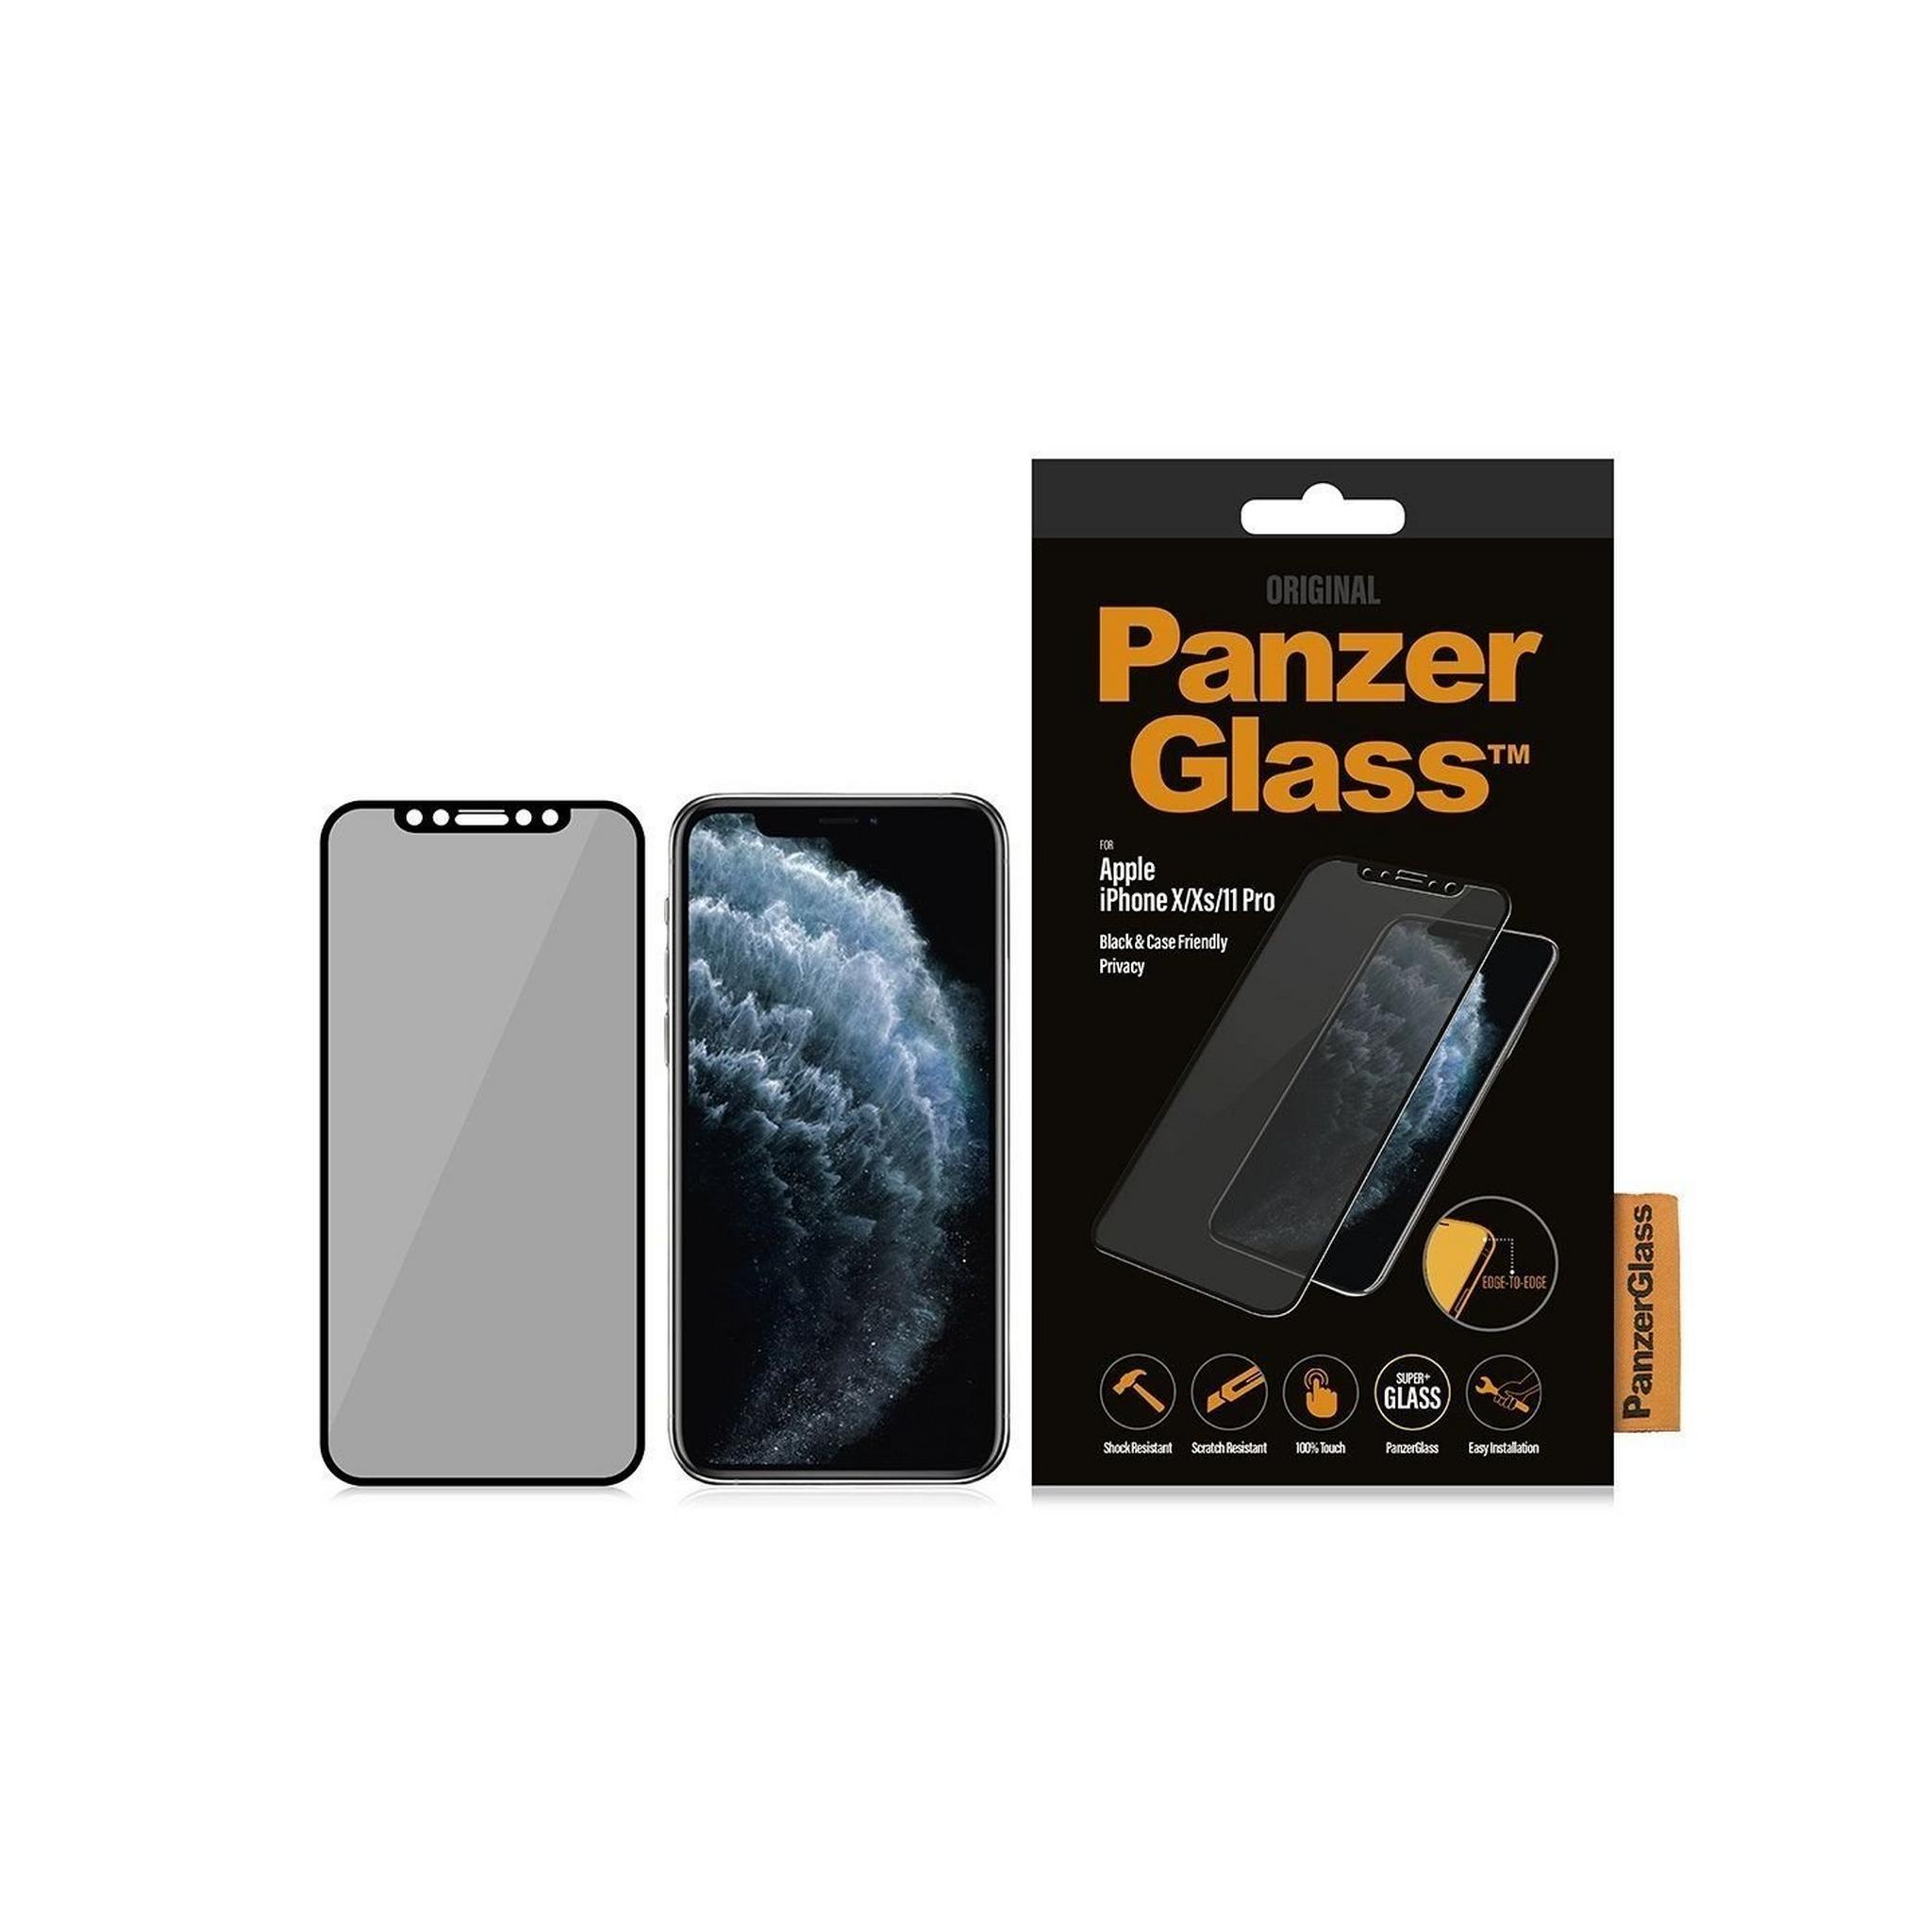 Panzer Glass iPhone 11 Pro Case Friendly Privacy Screen Protector (P2664) - Black